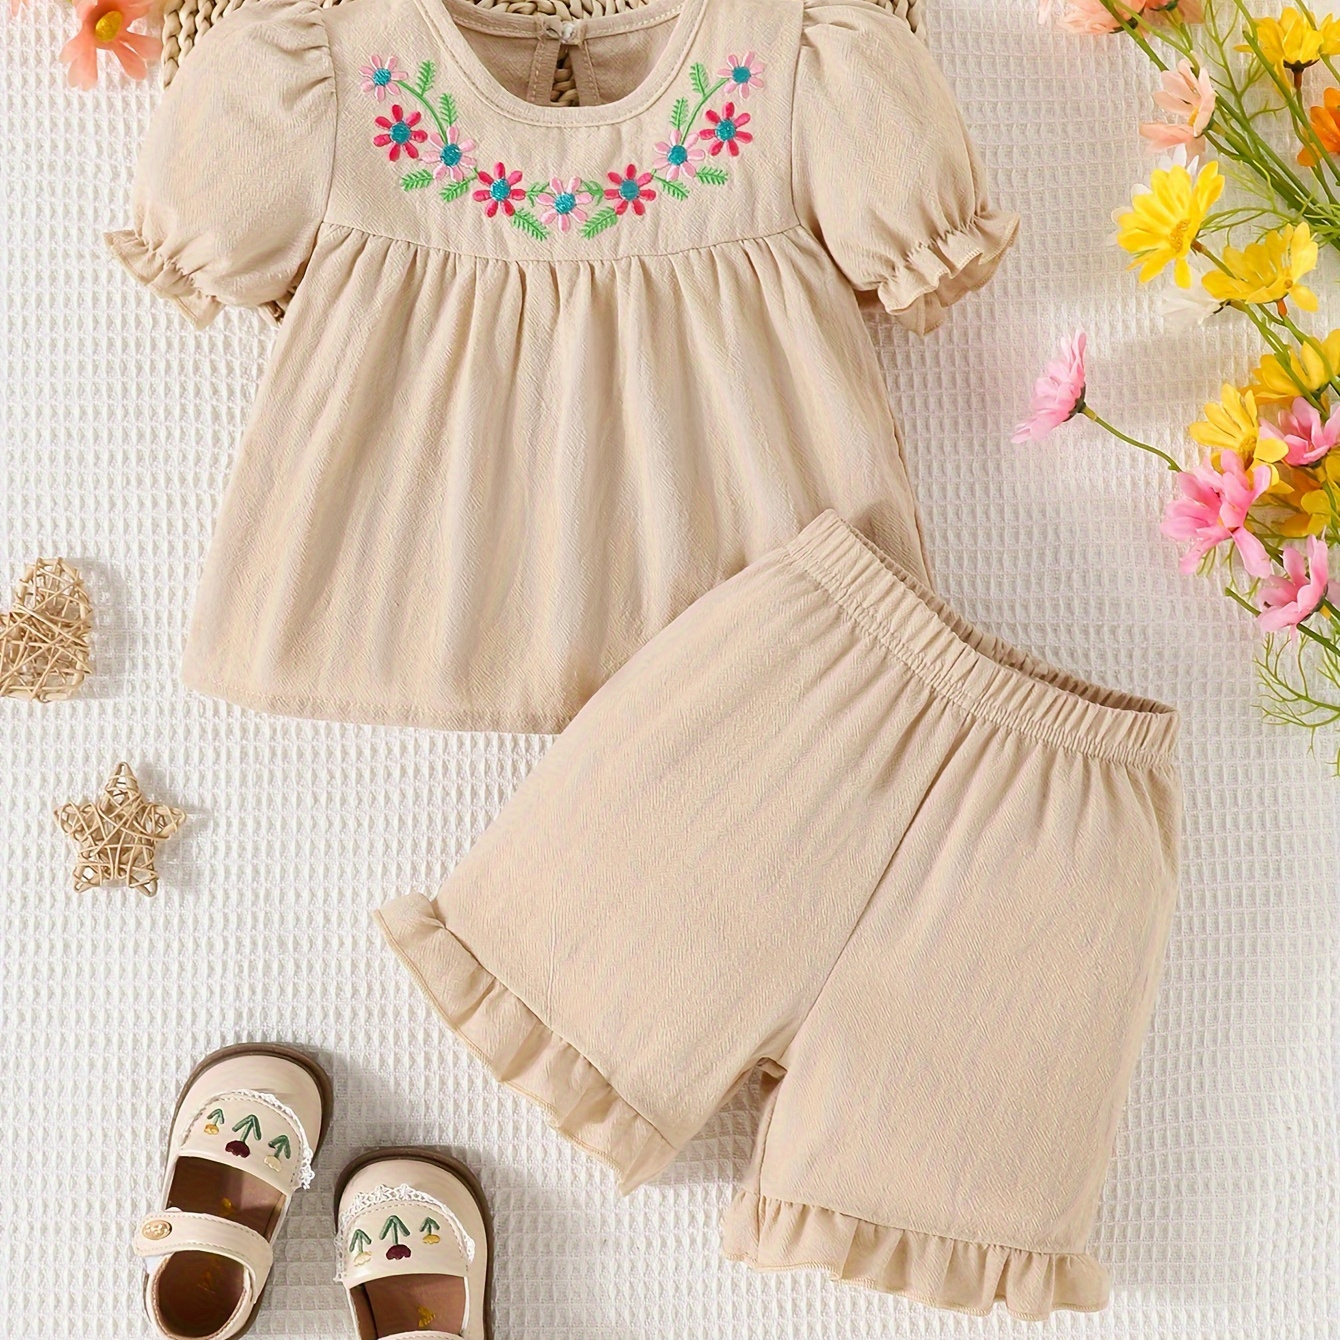 

2pcs Infant & Toddler's Floral Embroidered Pastoral Style Outfit, Comfy Cotton Peplum Top & Shorts, Baby Girl's Clothes